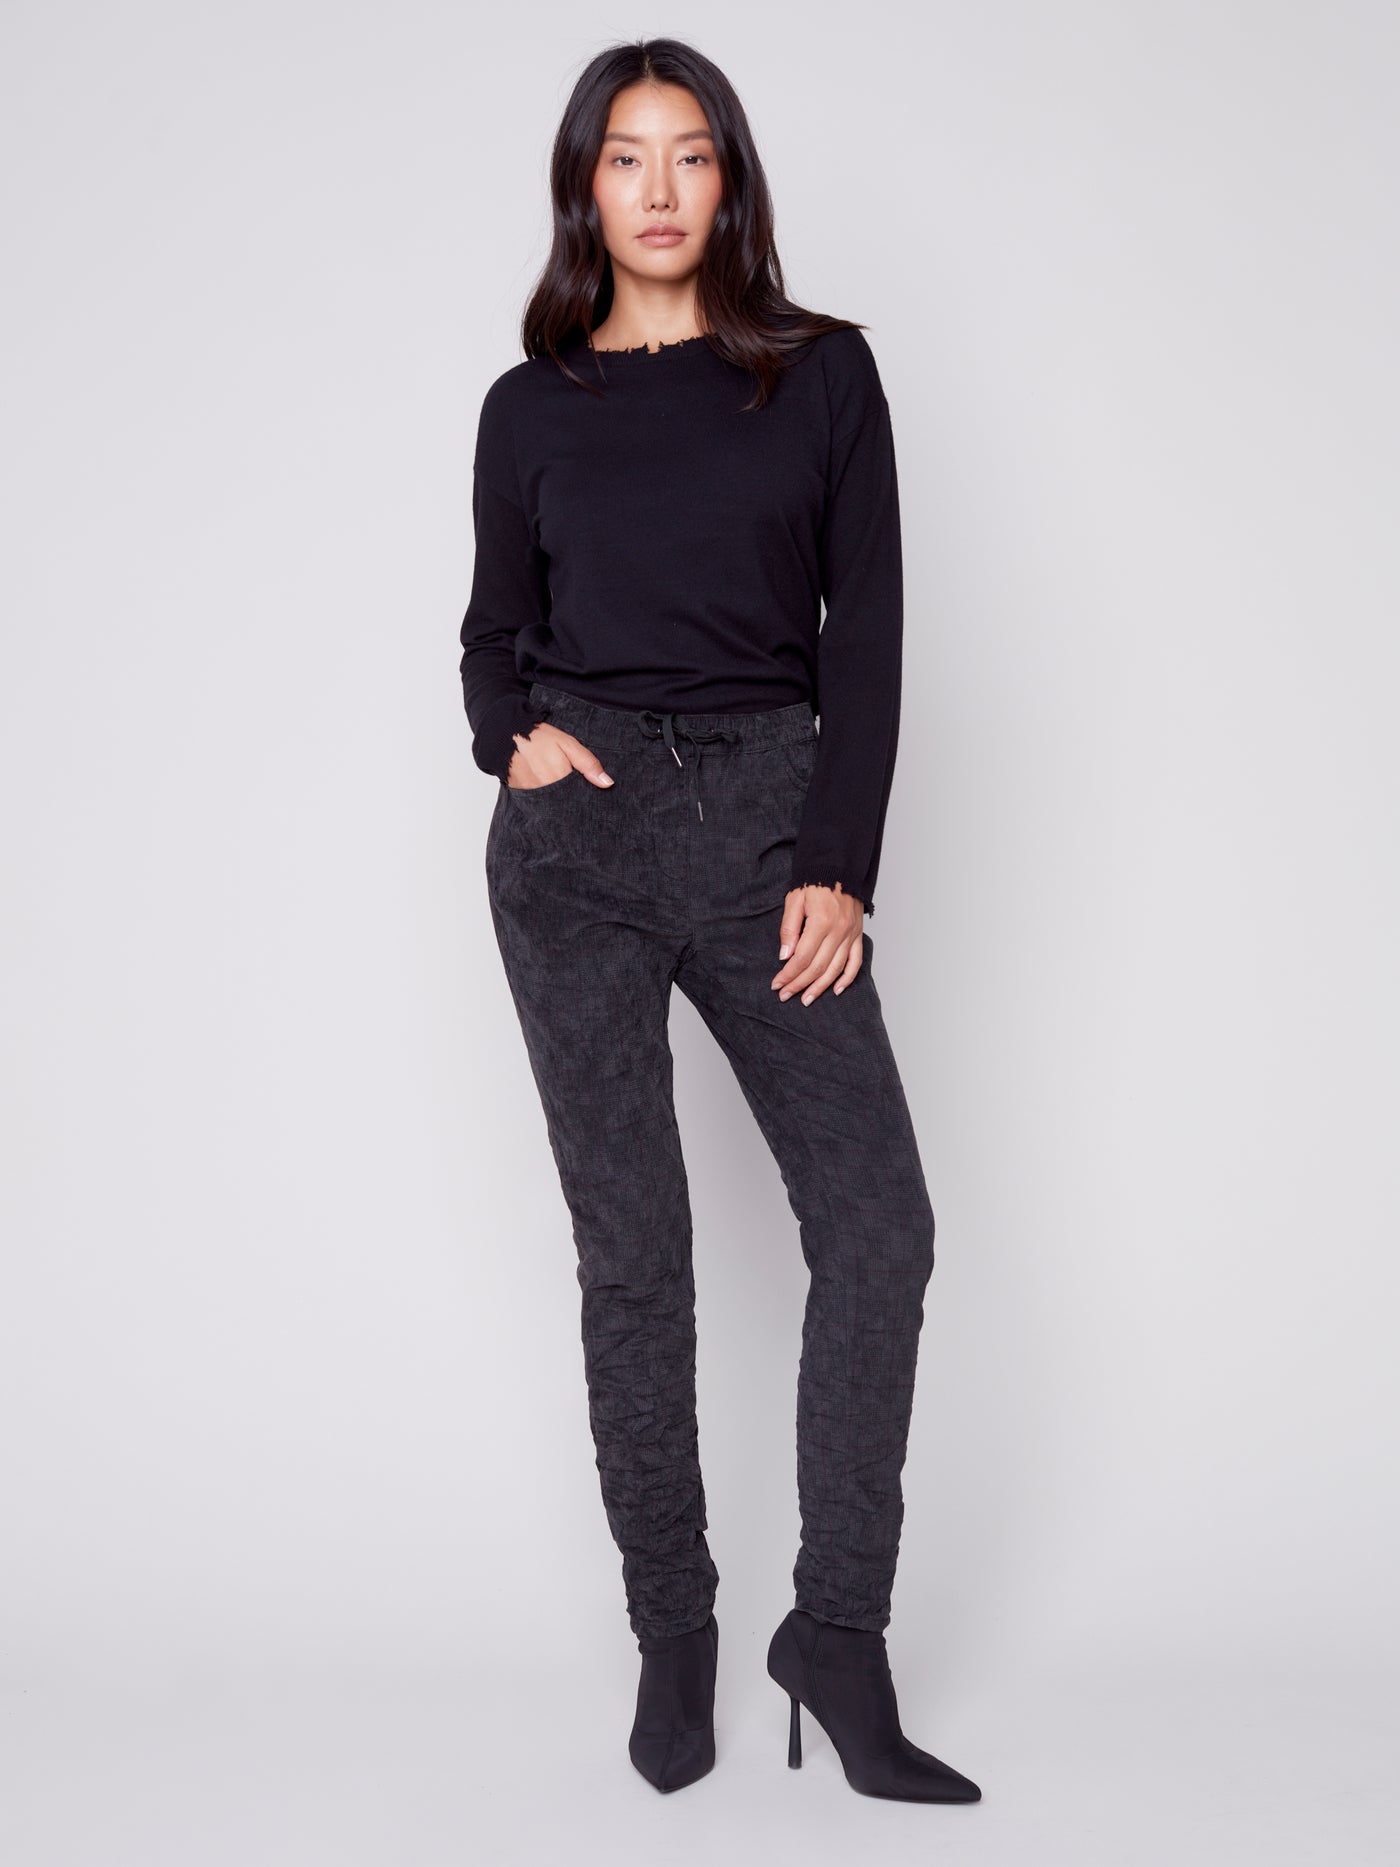 Port Print Stretch Suede Crinkle Jogger Pant